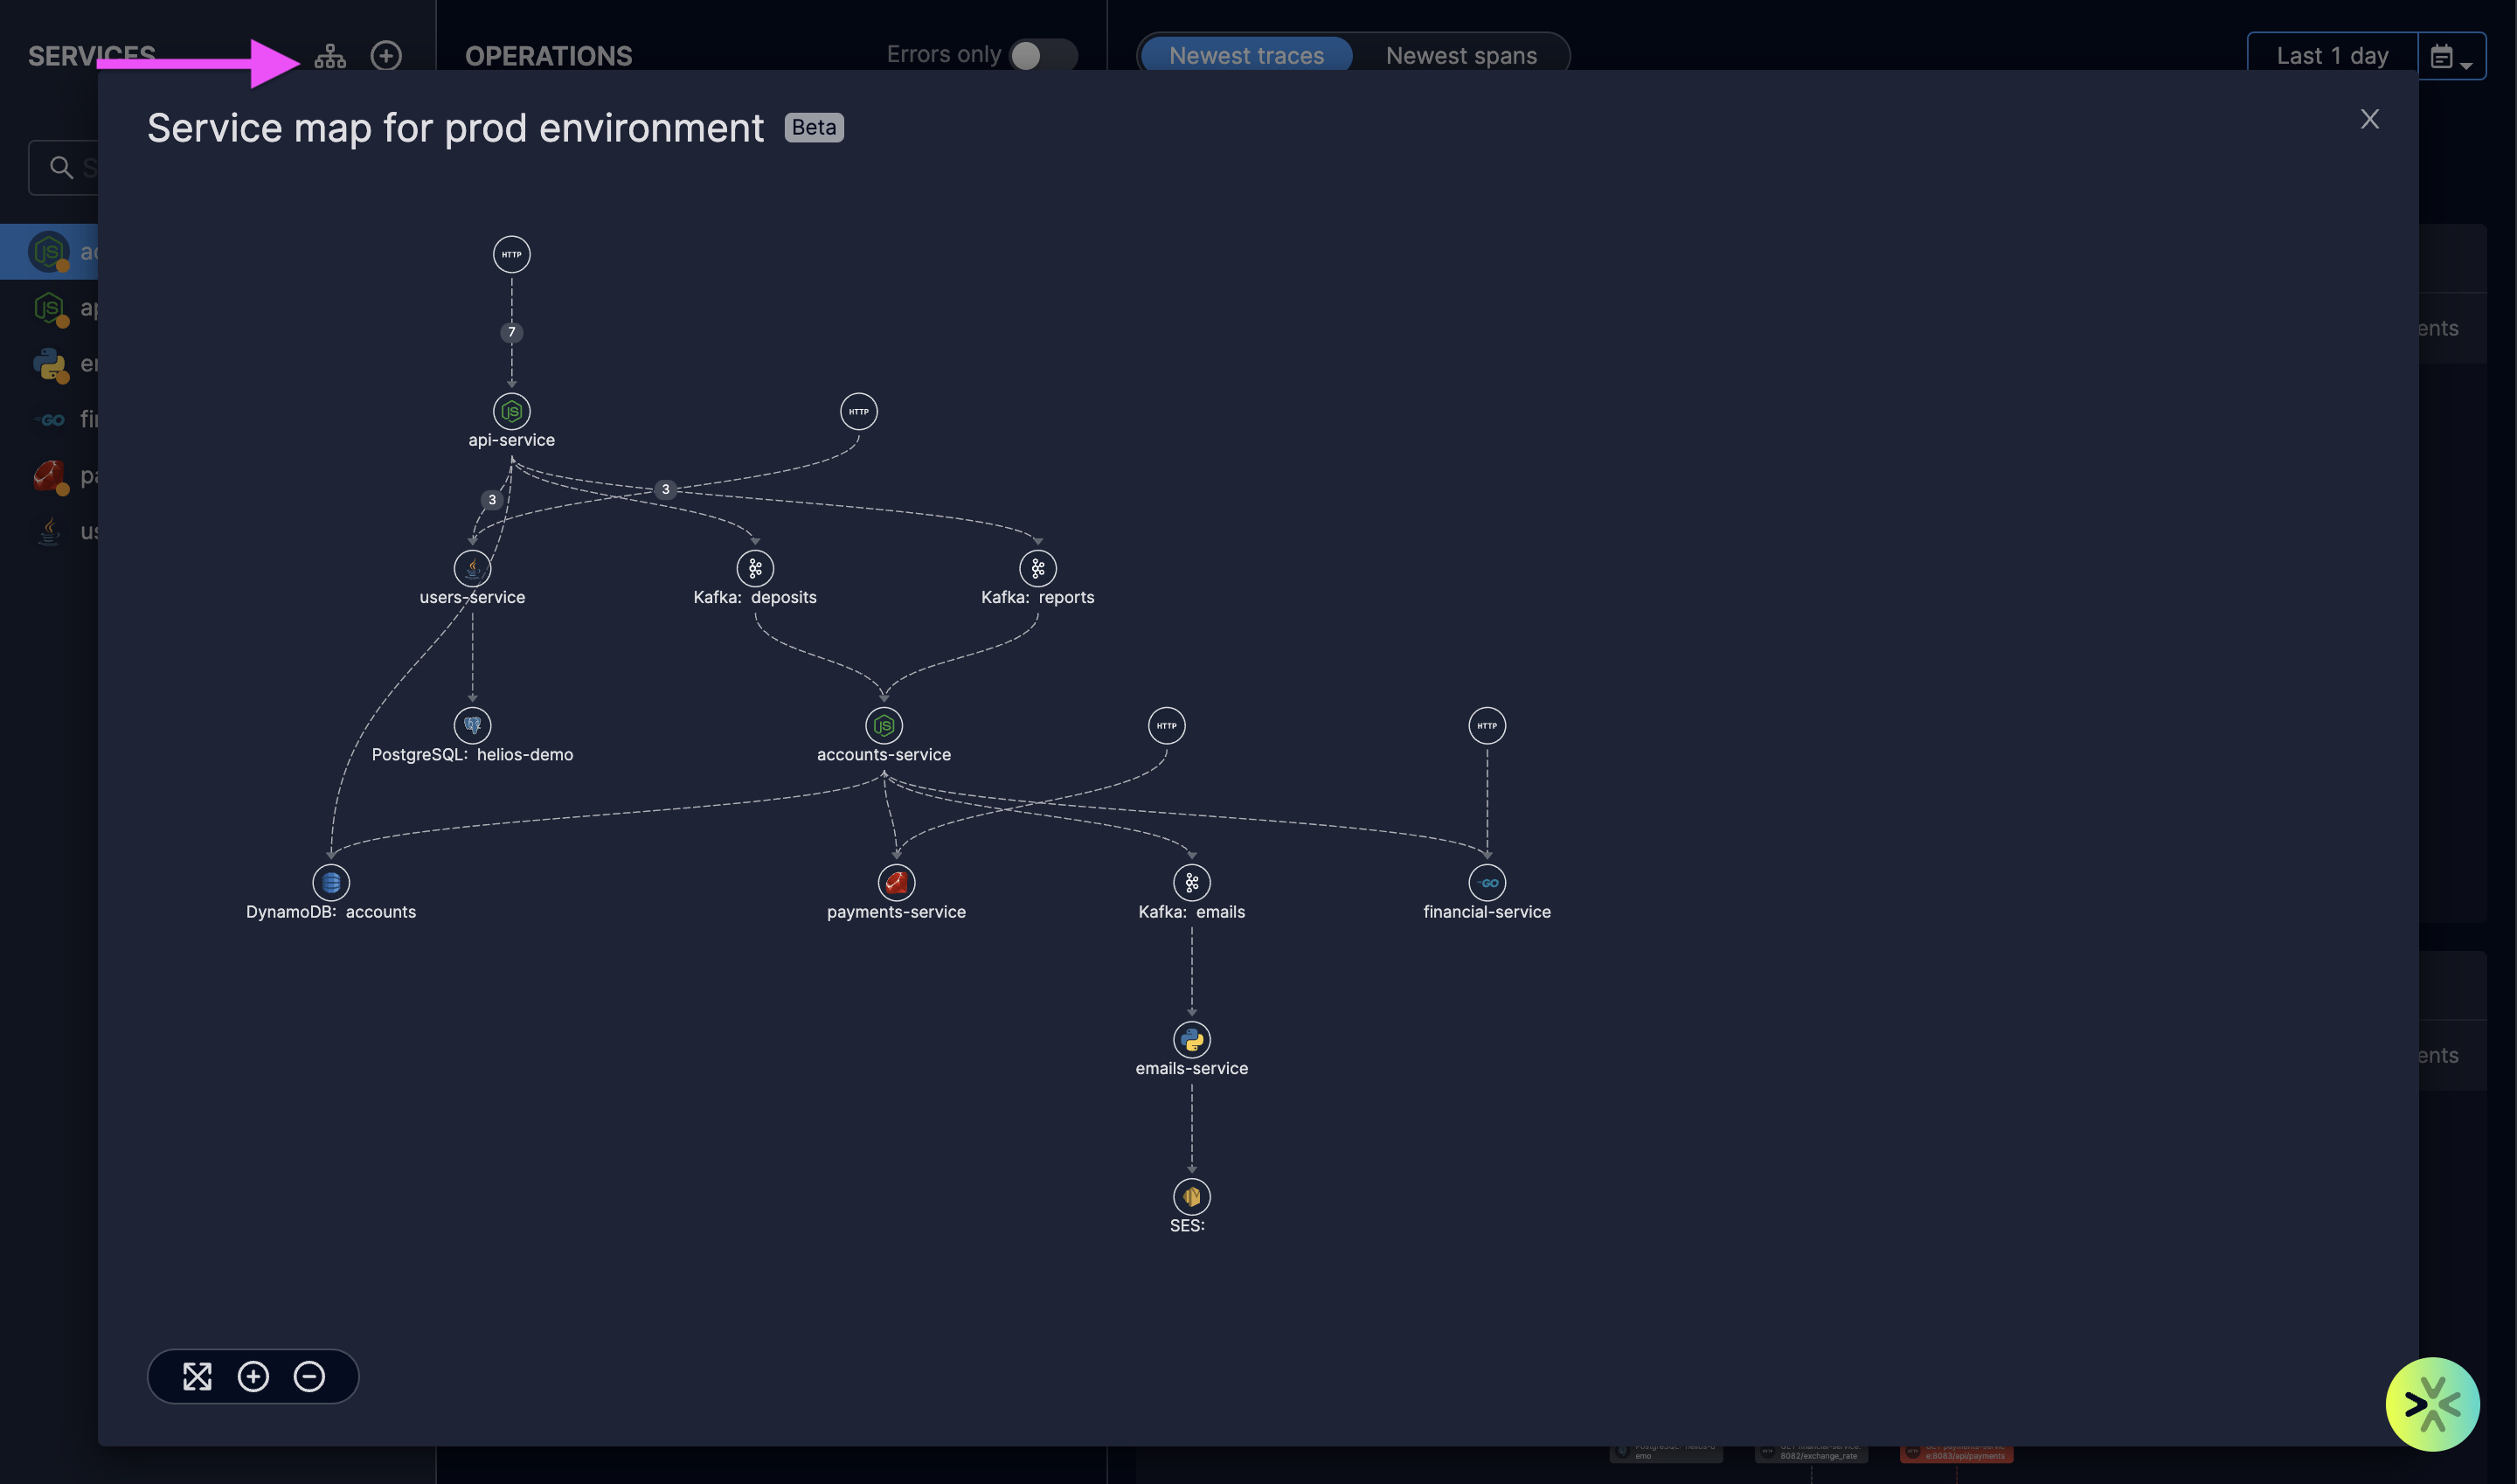 The service map in the [Helios Sandbox](https://sandbox.gethelios.dev/) shows the different interactions between the different components - in production